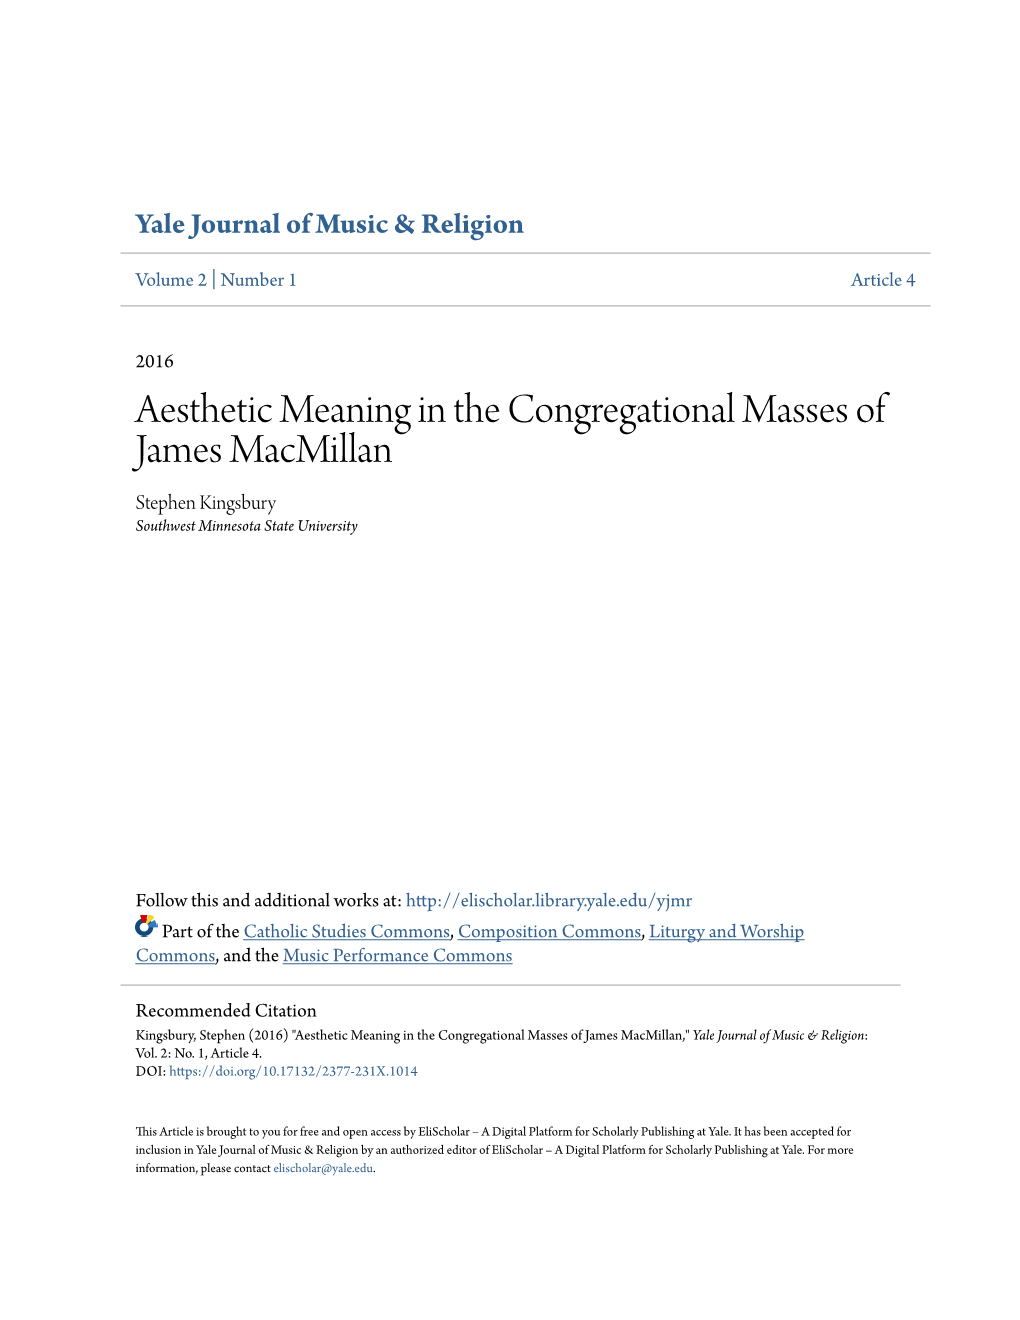 Aesthetic Meaning in the Congregational Masses of James Macmillan Stephen Kingsbury Southwest Minnesota State University